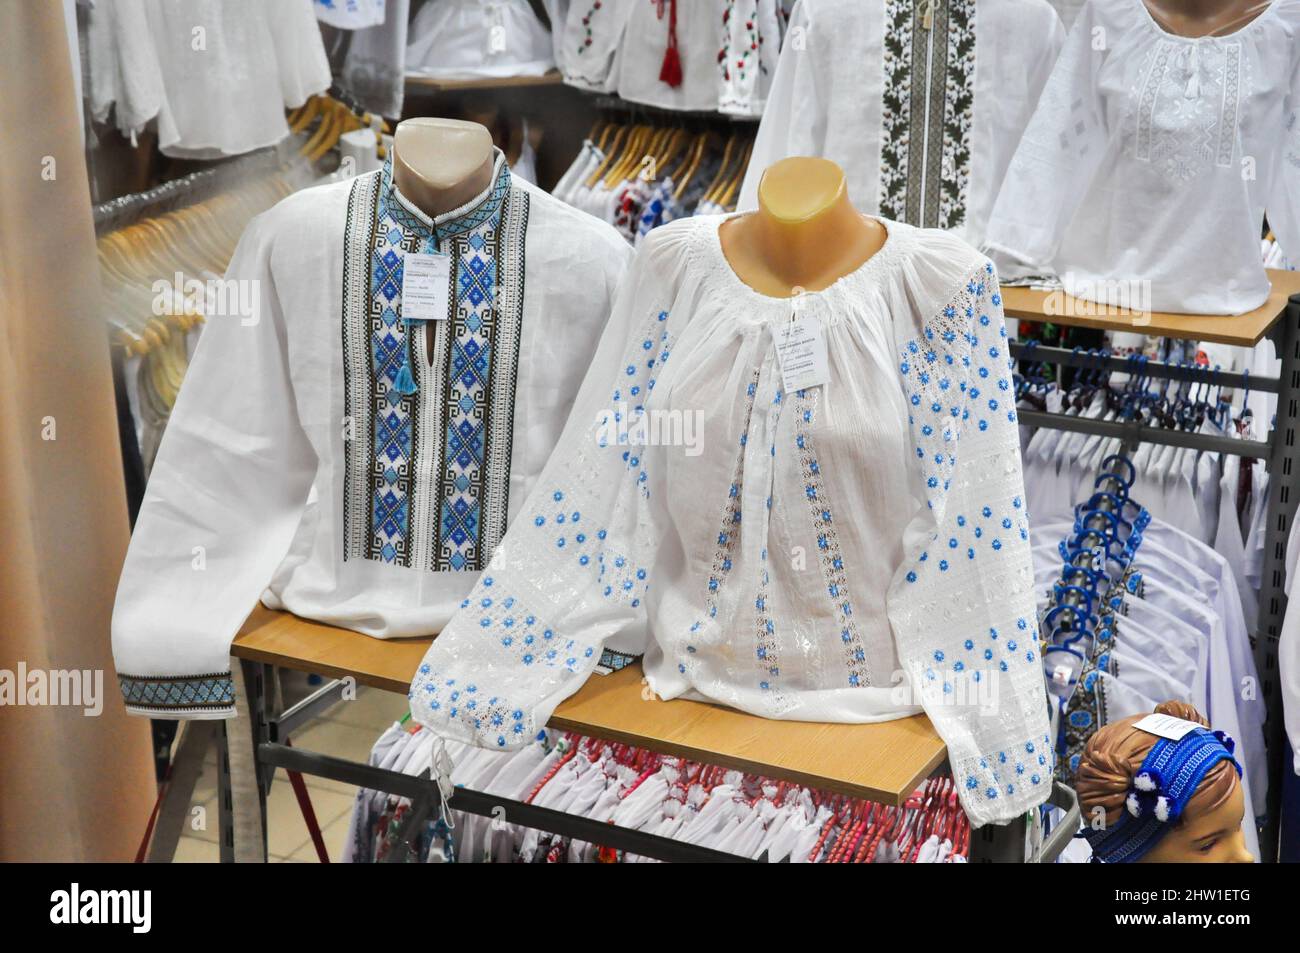 A shop selling traditional Ukrainian clothes and costumes in Kyiv (Kiev) city centre. Stock Photo